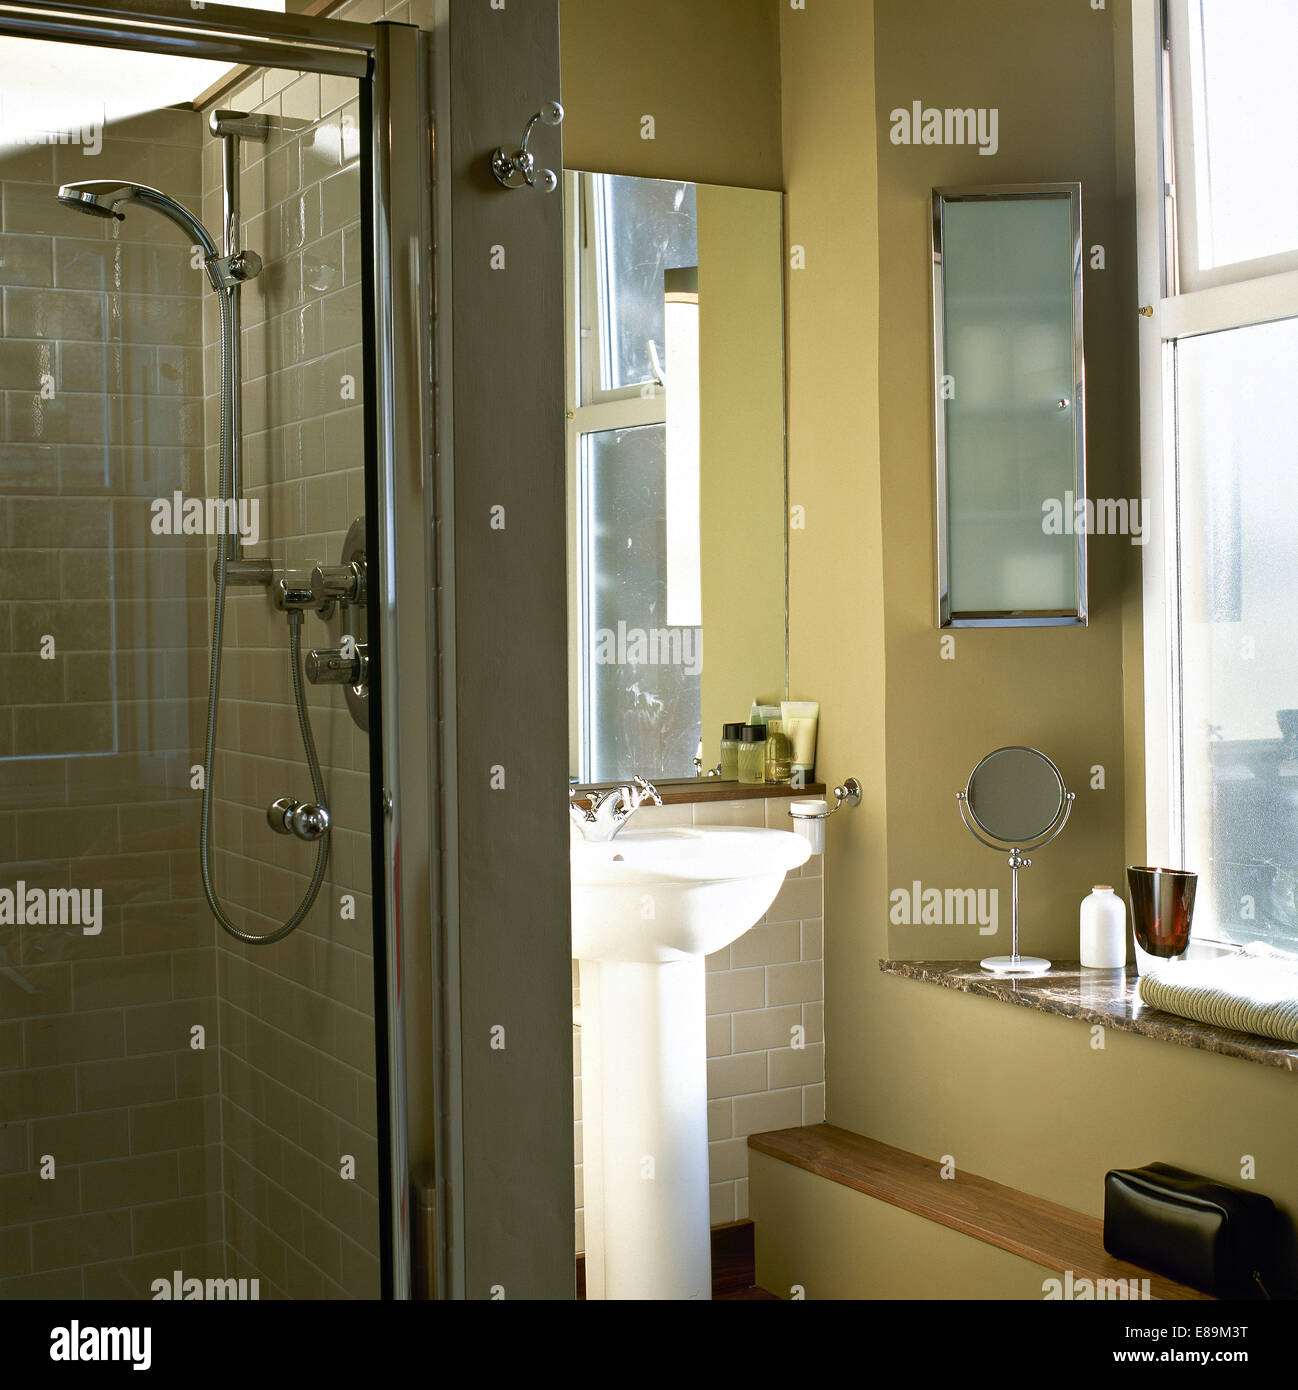 Glass shower cabinet in modern bathroom with glass front wall cabinet Stock Photo